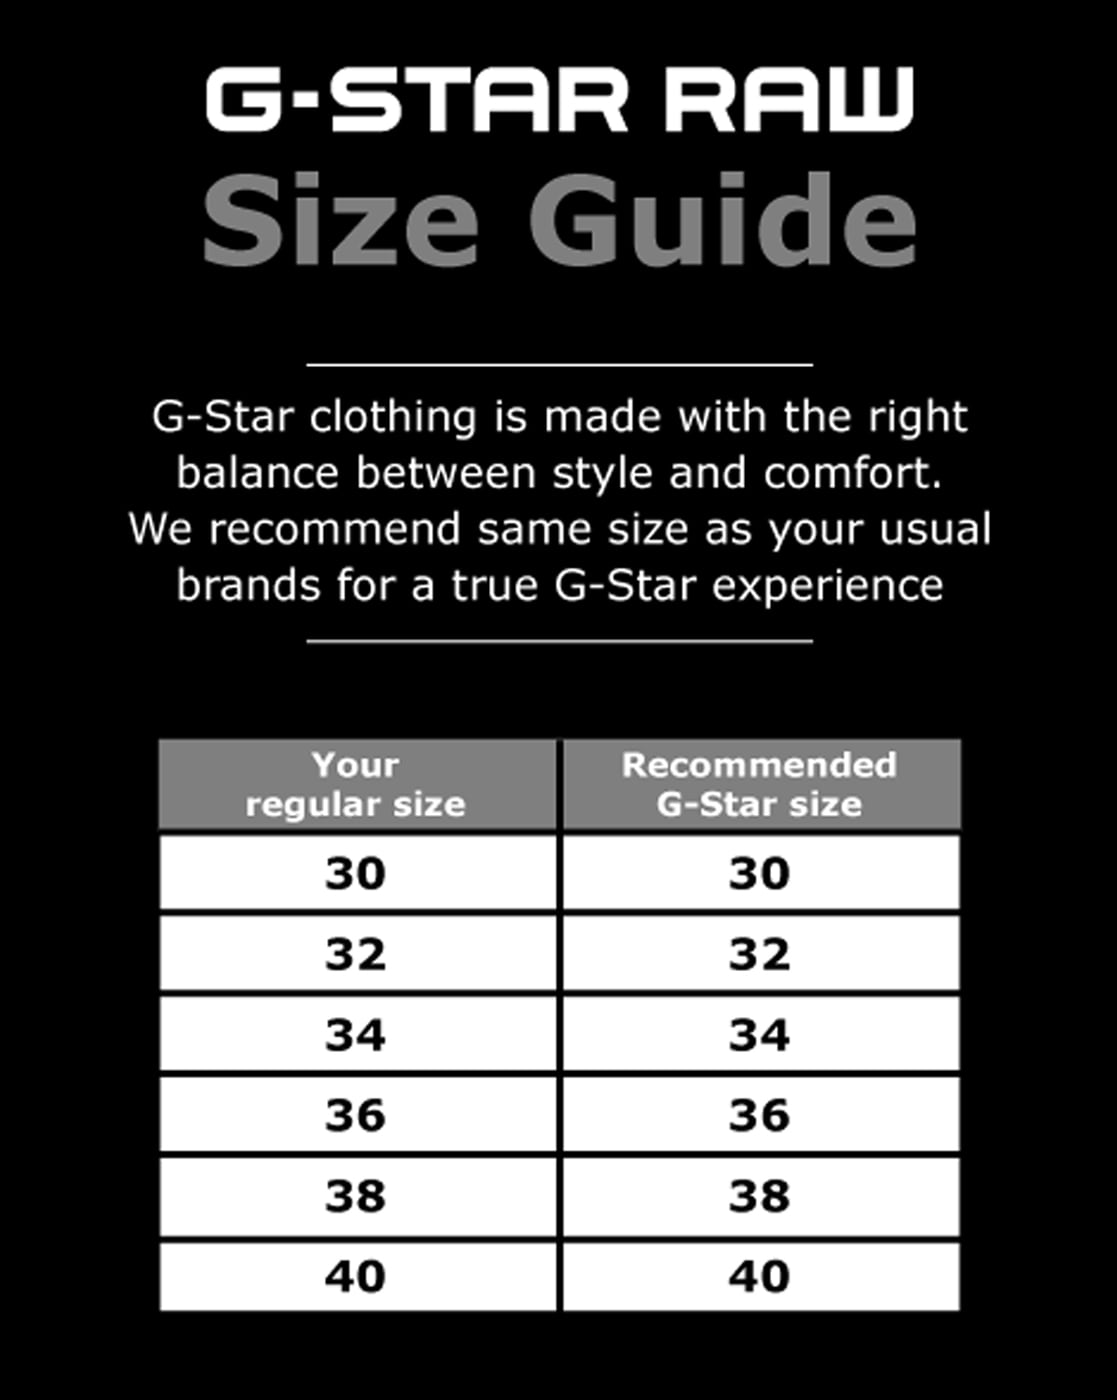 g star raw size guide